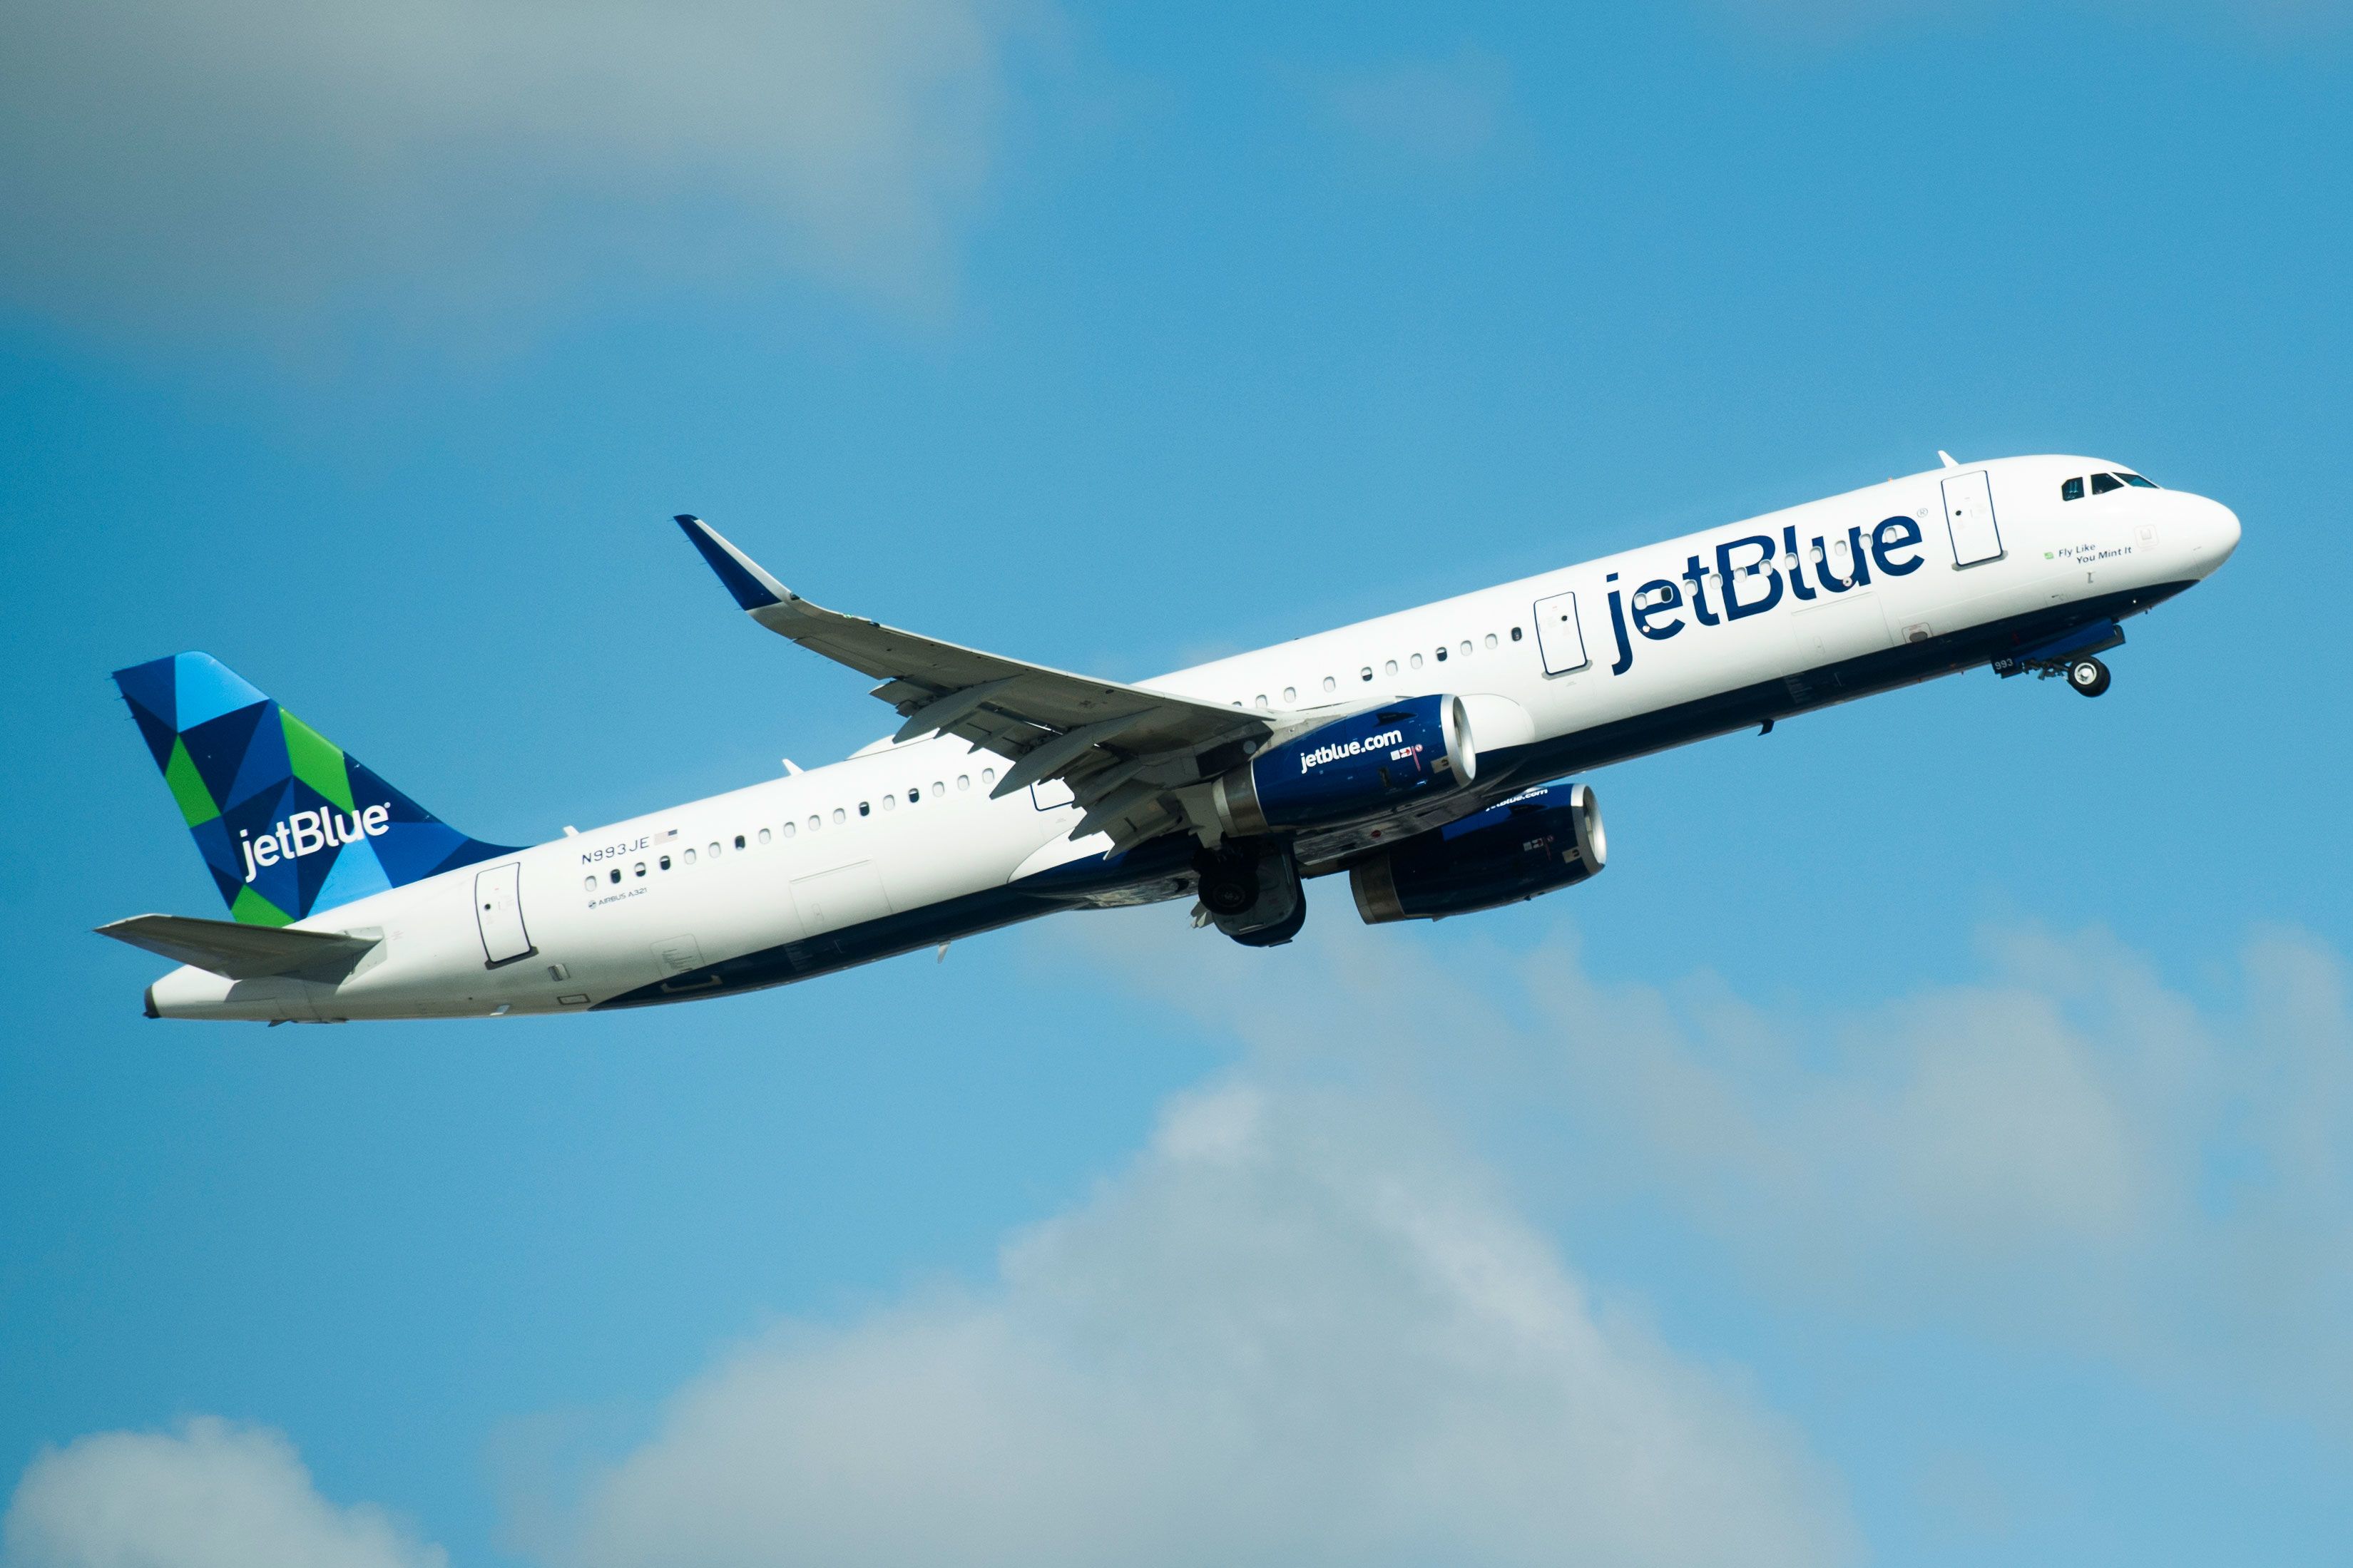 JetBlue plans more flights to Europe with new long-range Airbus jets